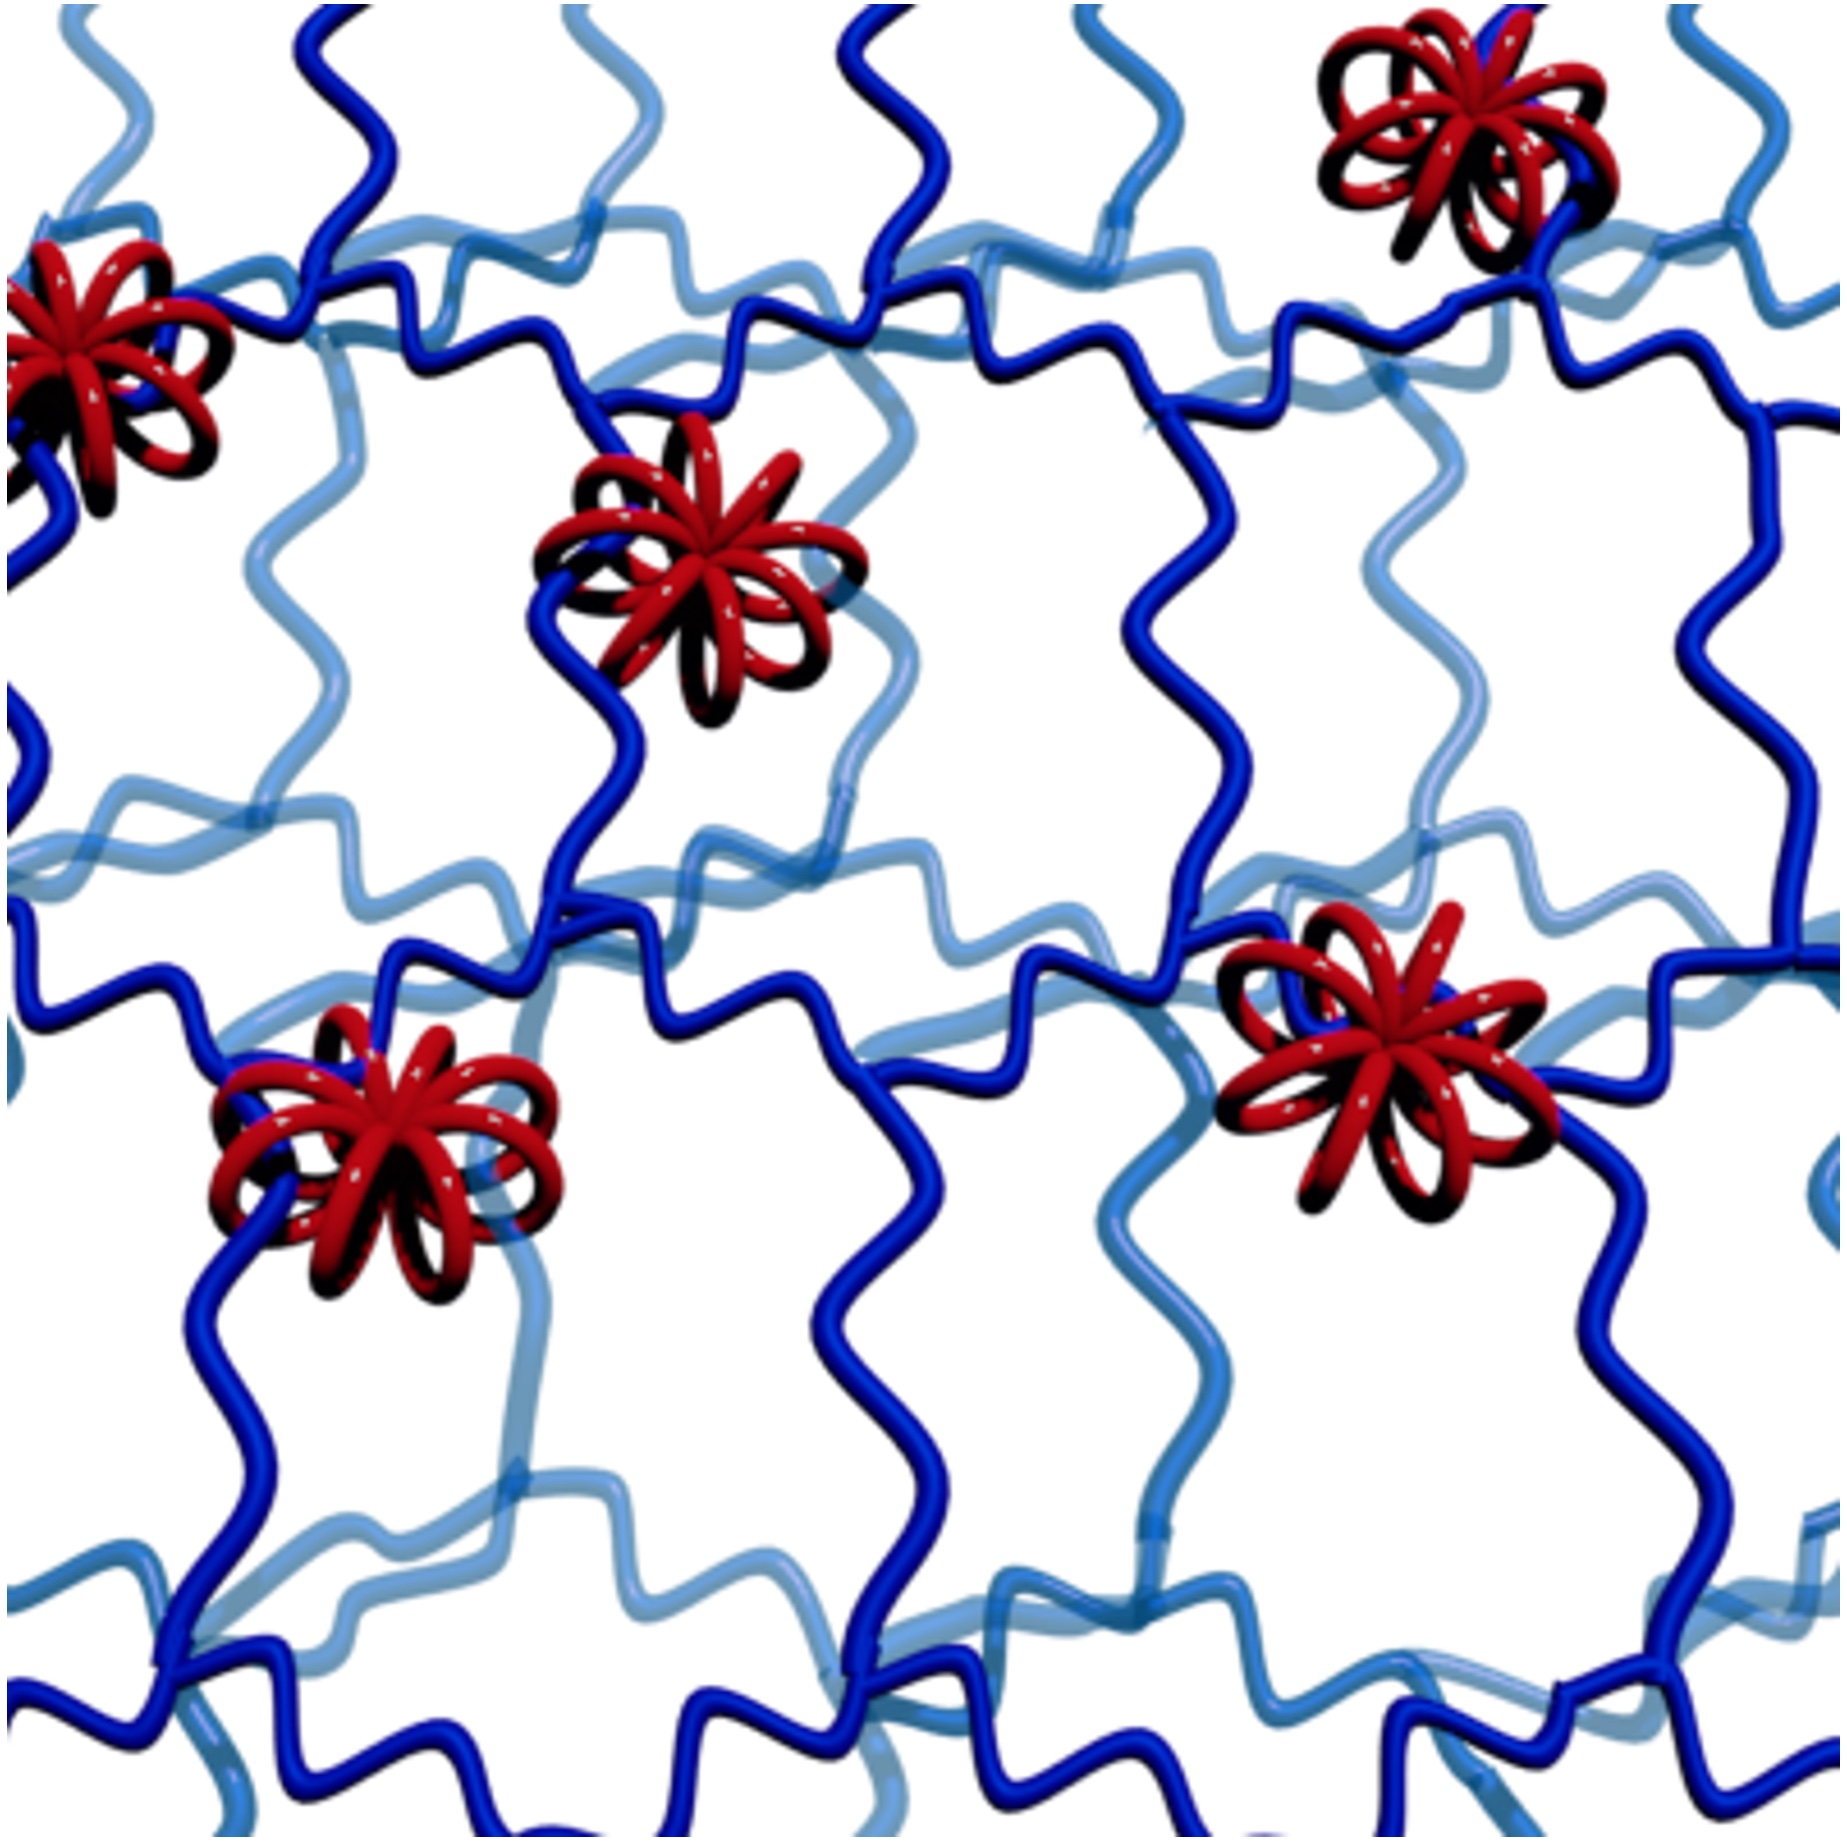 Structure of macro-rotaxane synthesized in this study: multicyclic wheels (red) interlocked with several high-molecular-weight axles (blue). (Minami Ebe, et al. Angewandte Chemie International Edition. July 17, 2023)